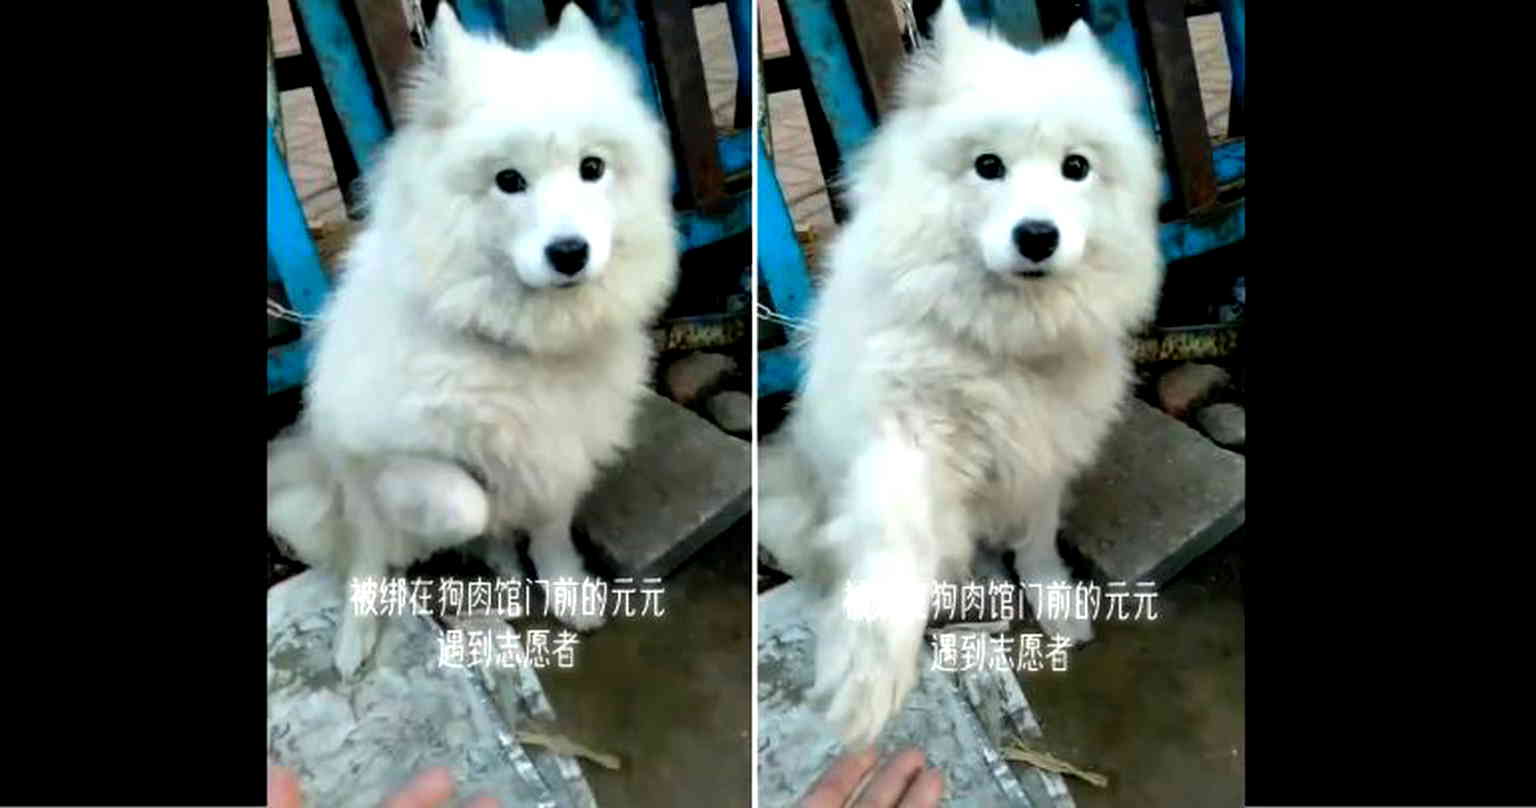 ‘Stolen’ Dog at Market Asks for Rescue By Extending Paw to Passerby in China